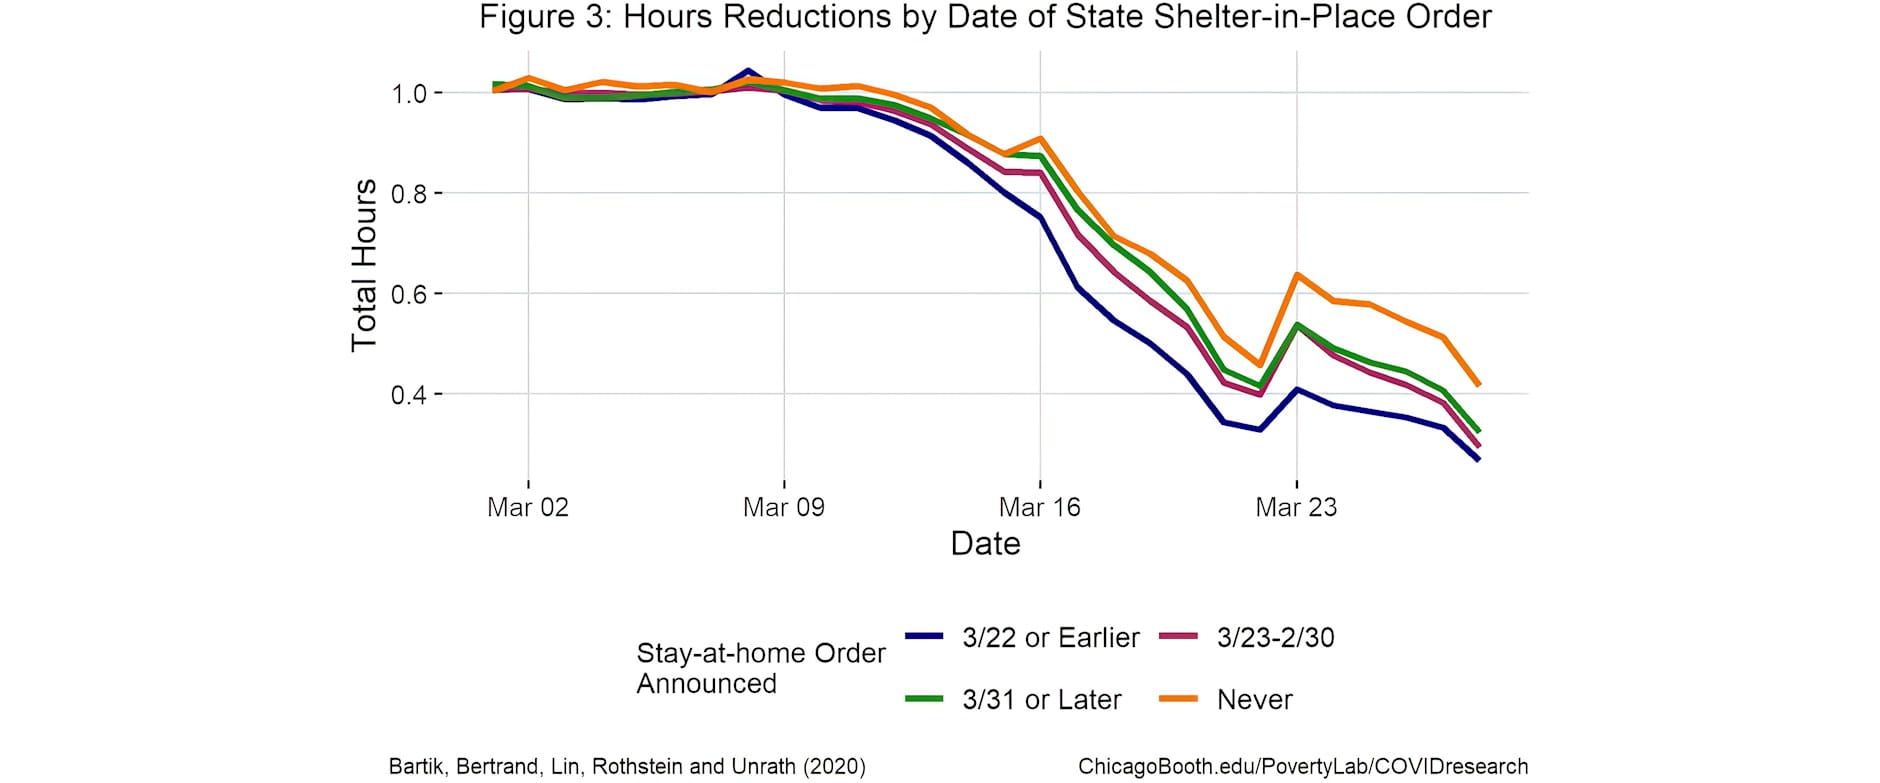 Figure 3: Hours Reductions by Date of State Shelter-in-Place Order